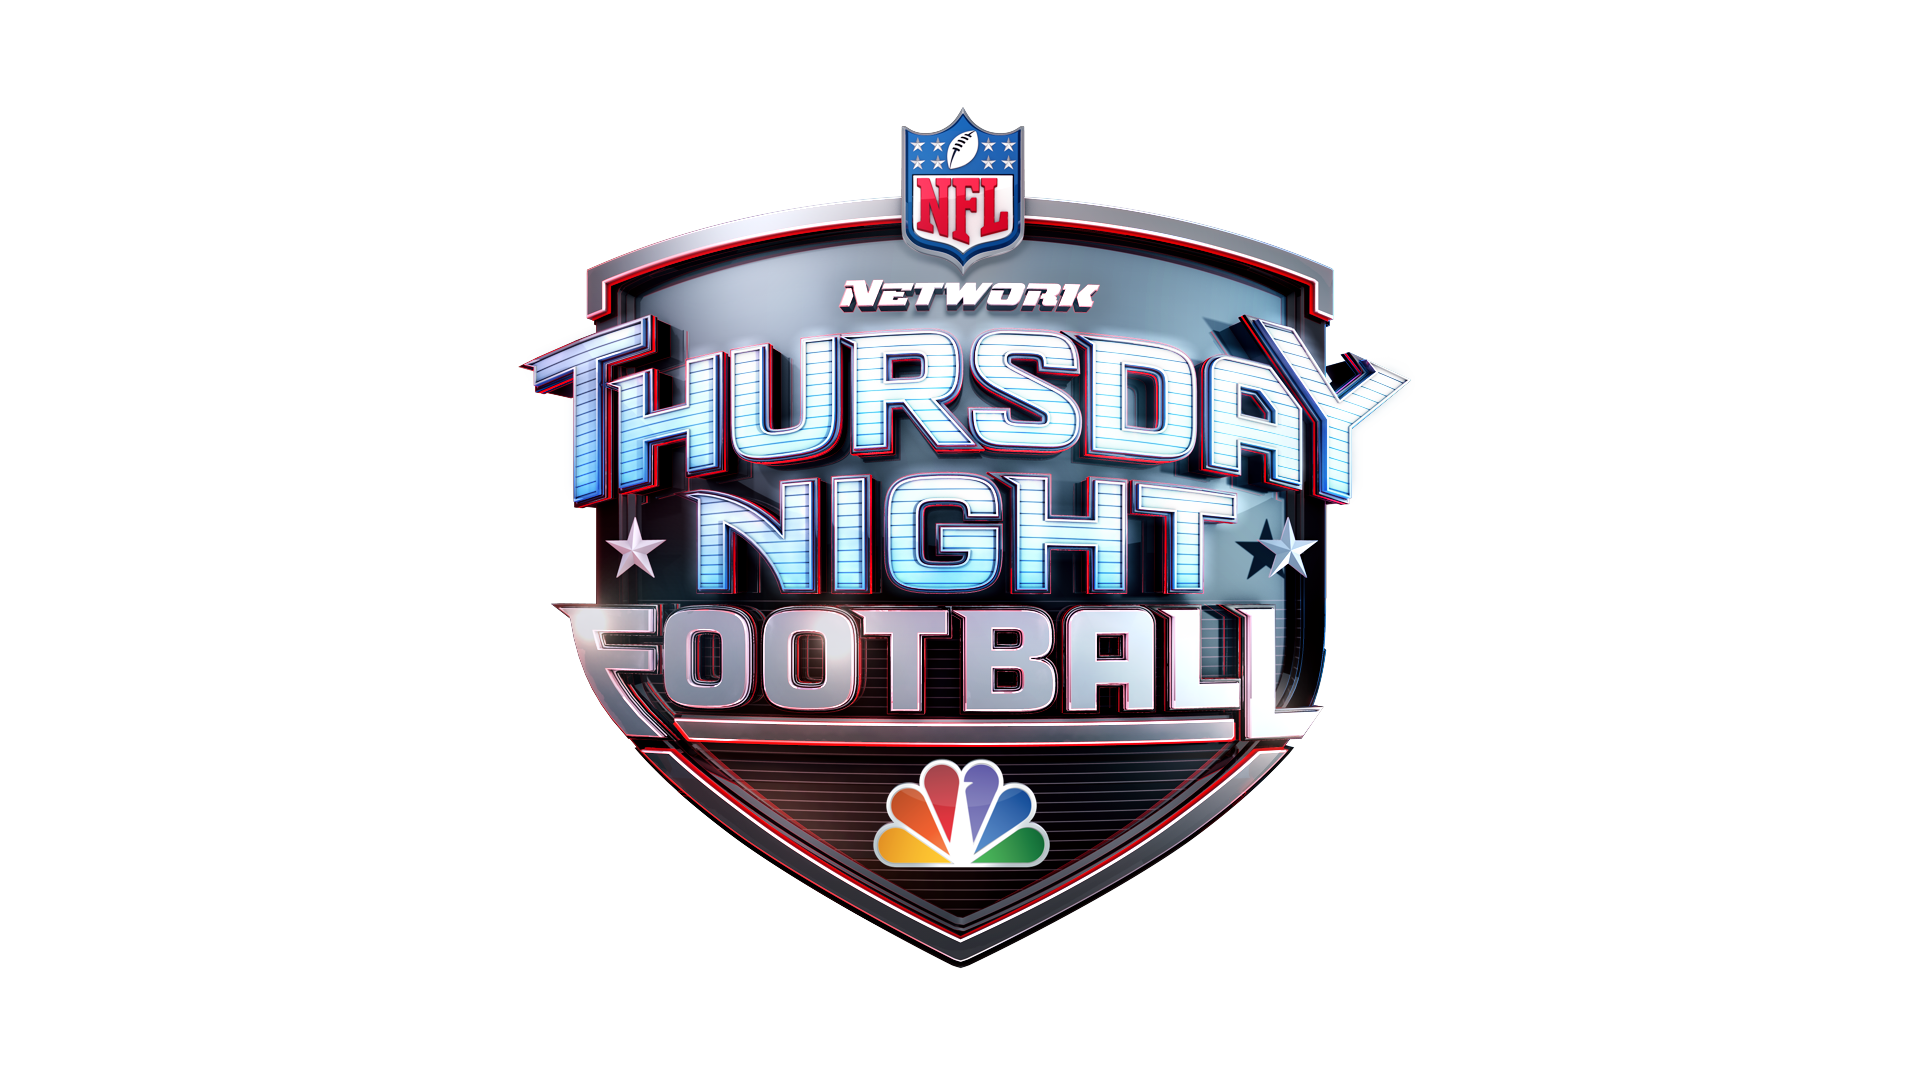 NBC'S “THURSDAY NIGHT FOOTBALL” MUSIC COMPOSED BY JIMMY GRECO, WITH  ORCHESTRAL PORTION PERFORMED BY STRING SECTION FROM BROADWAY'S “HAMILTON” -  NBC Sports PressboxNBC Sports Pressbox